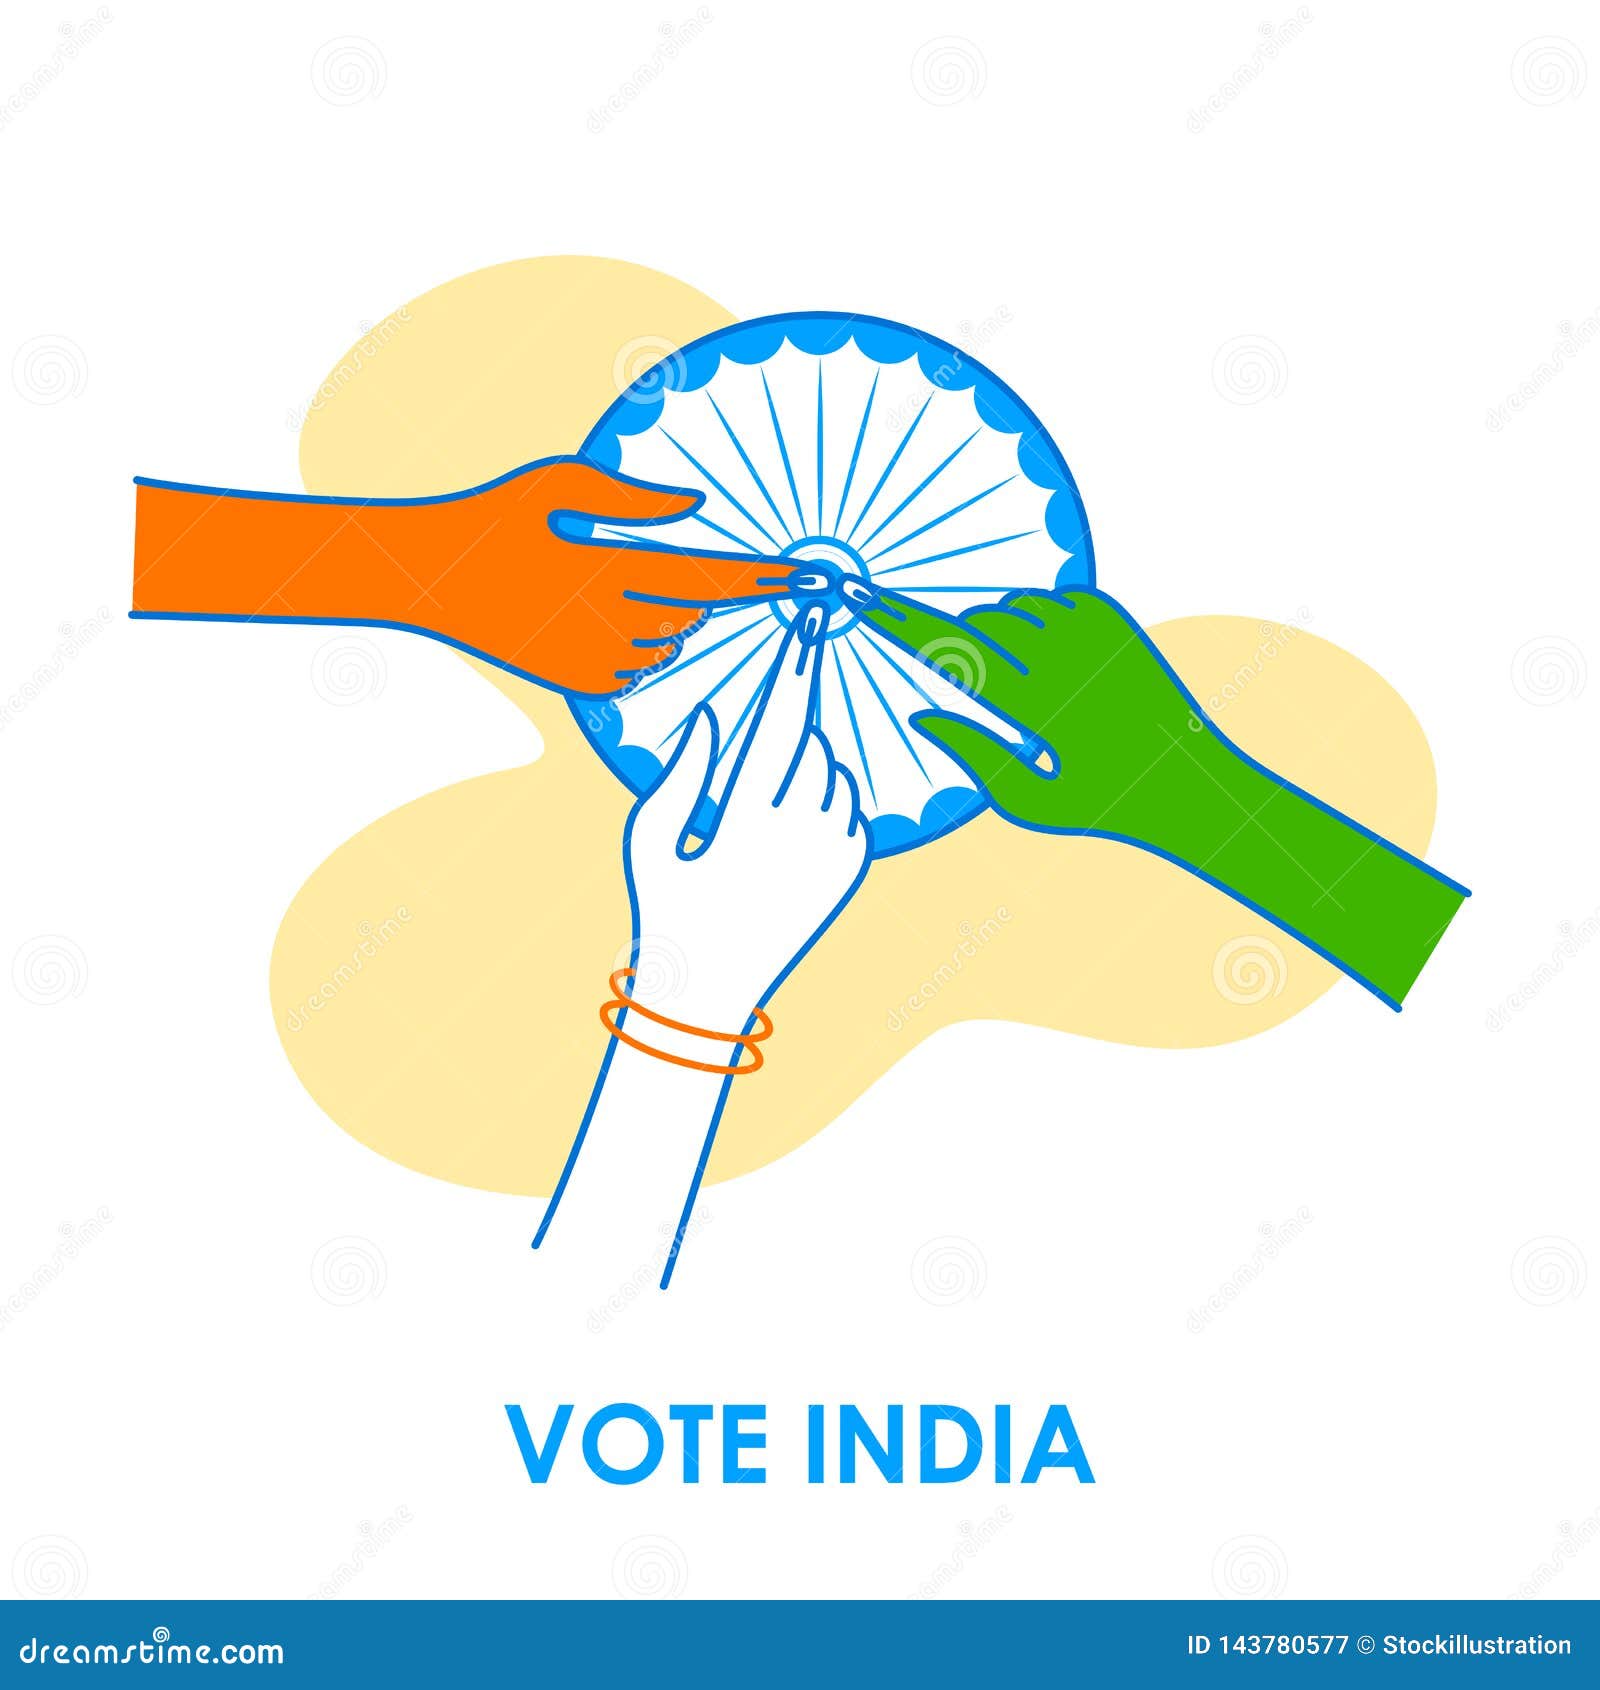 Concept Background for Vote India for Election Democracy Campaign Banner  Stock Vector - Illustration of indian, electronic: 143780577